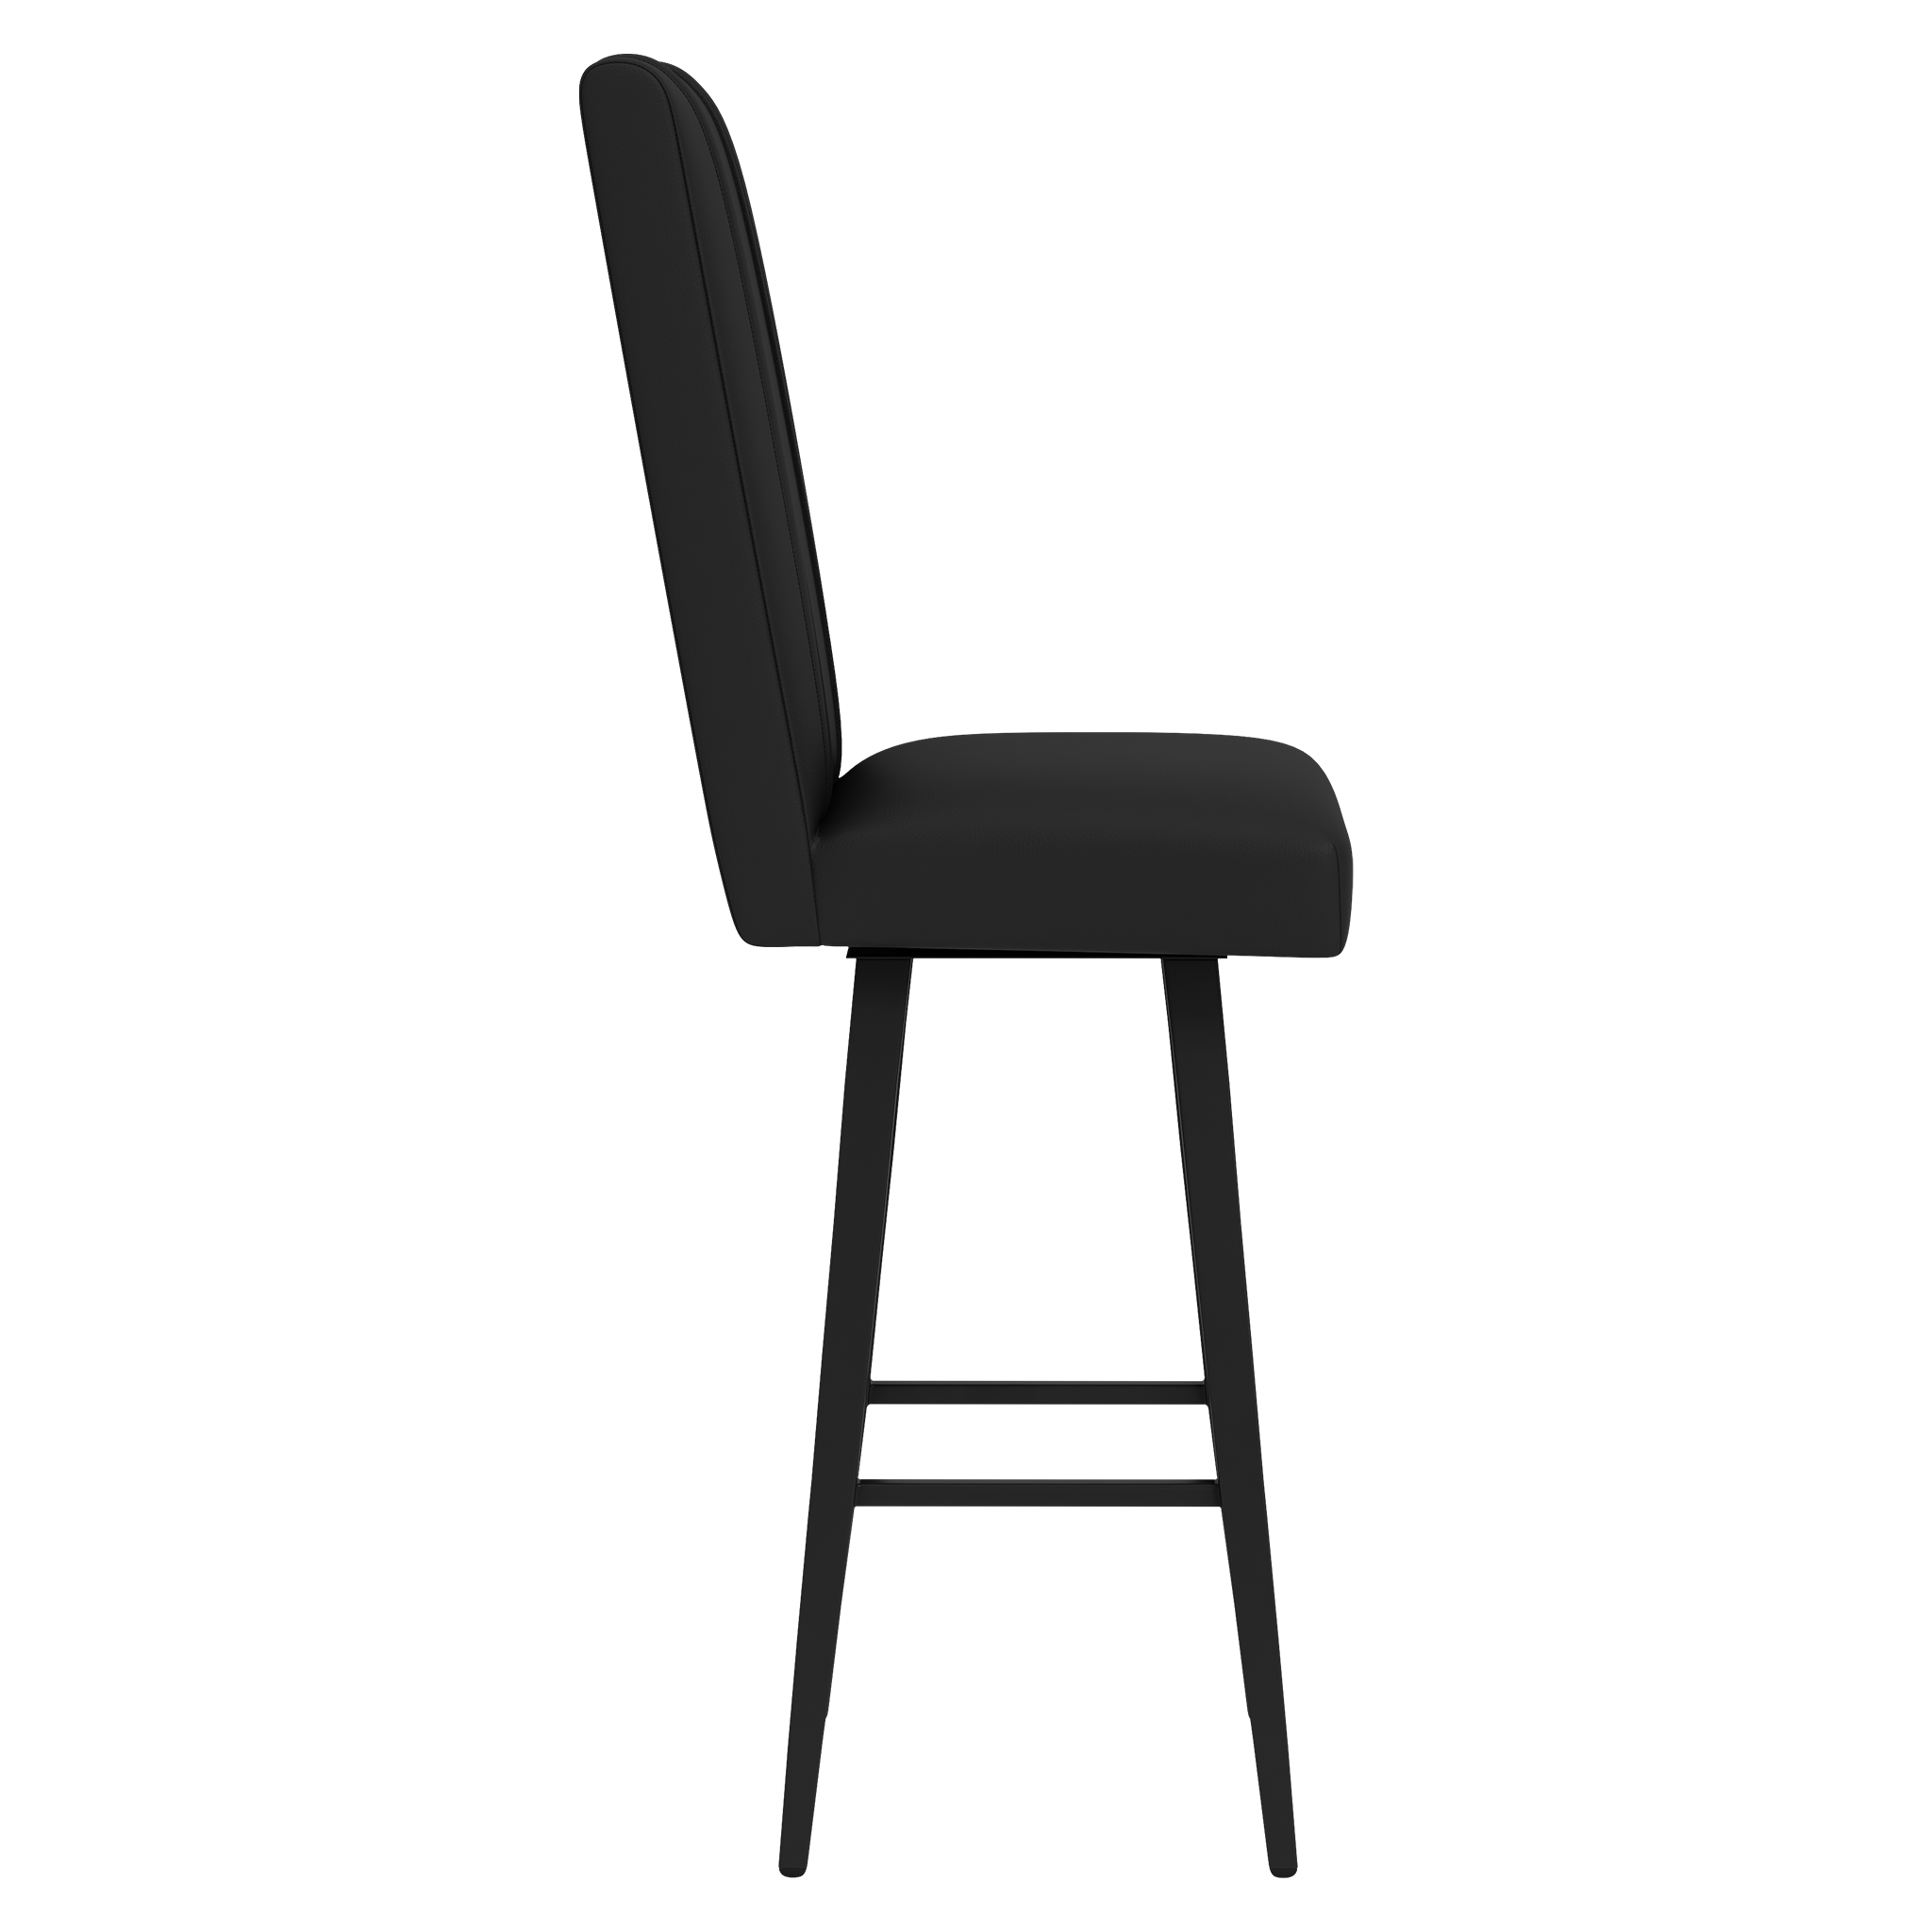 Swivel Bar Stool 2000 with New York Yankees Cooperstown